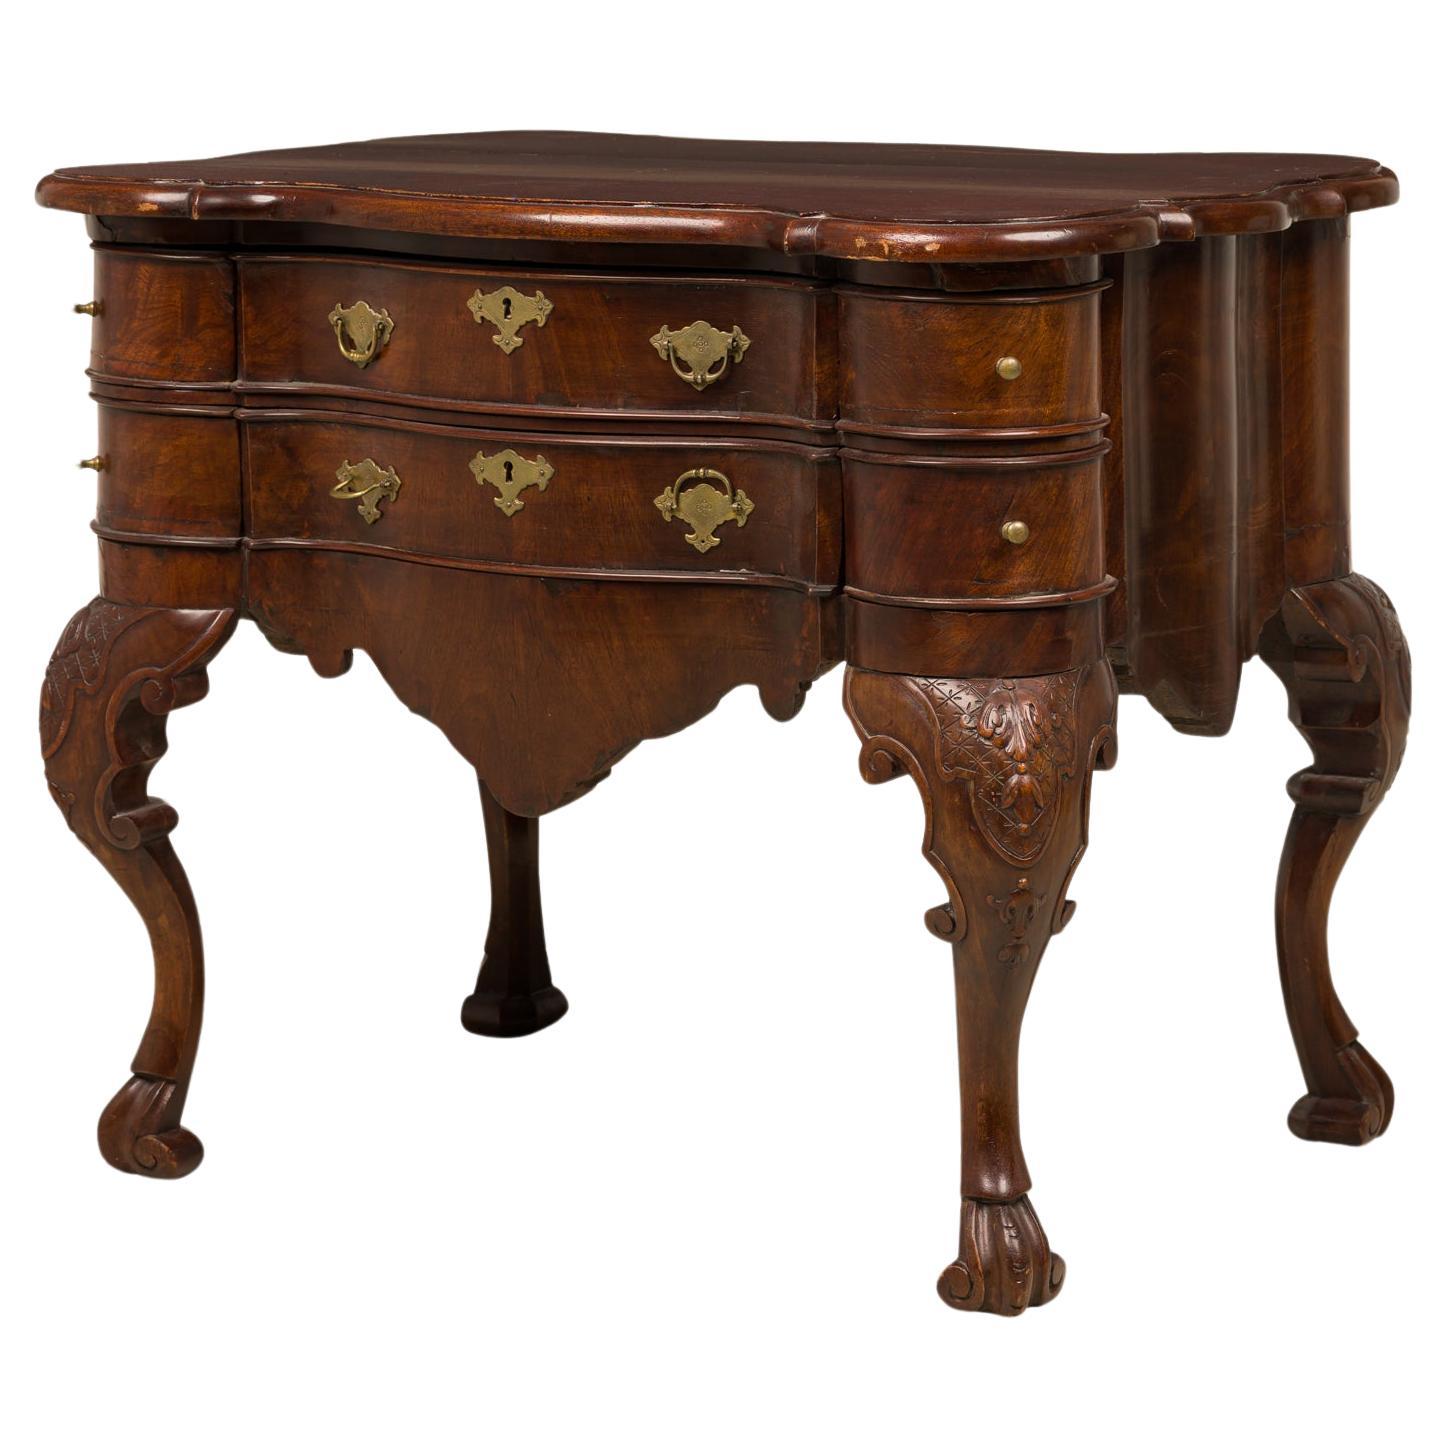 Dutch Continental 18th Century Center Table with 6 Drawers For Sale